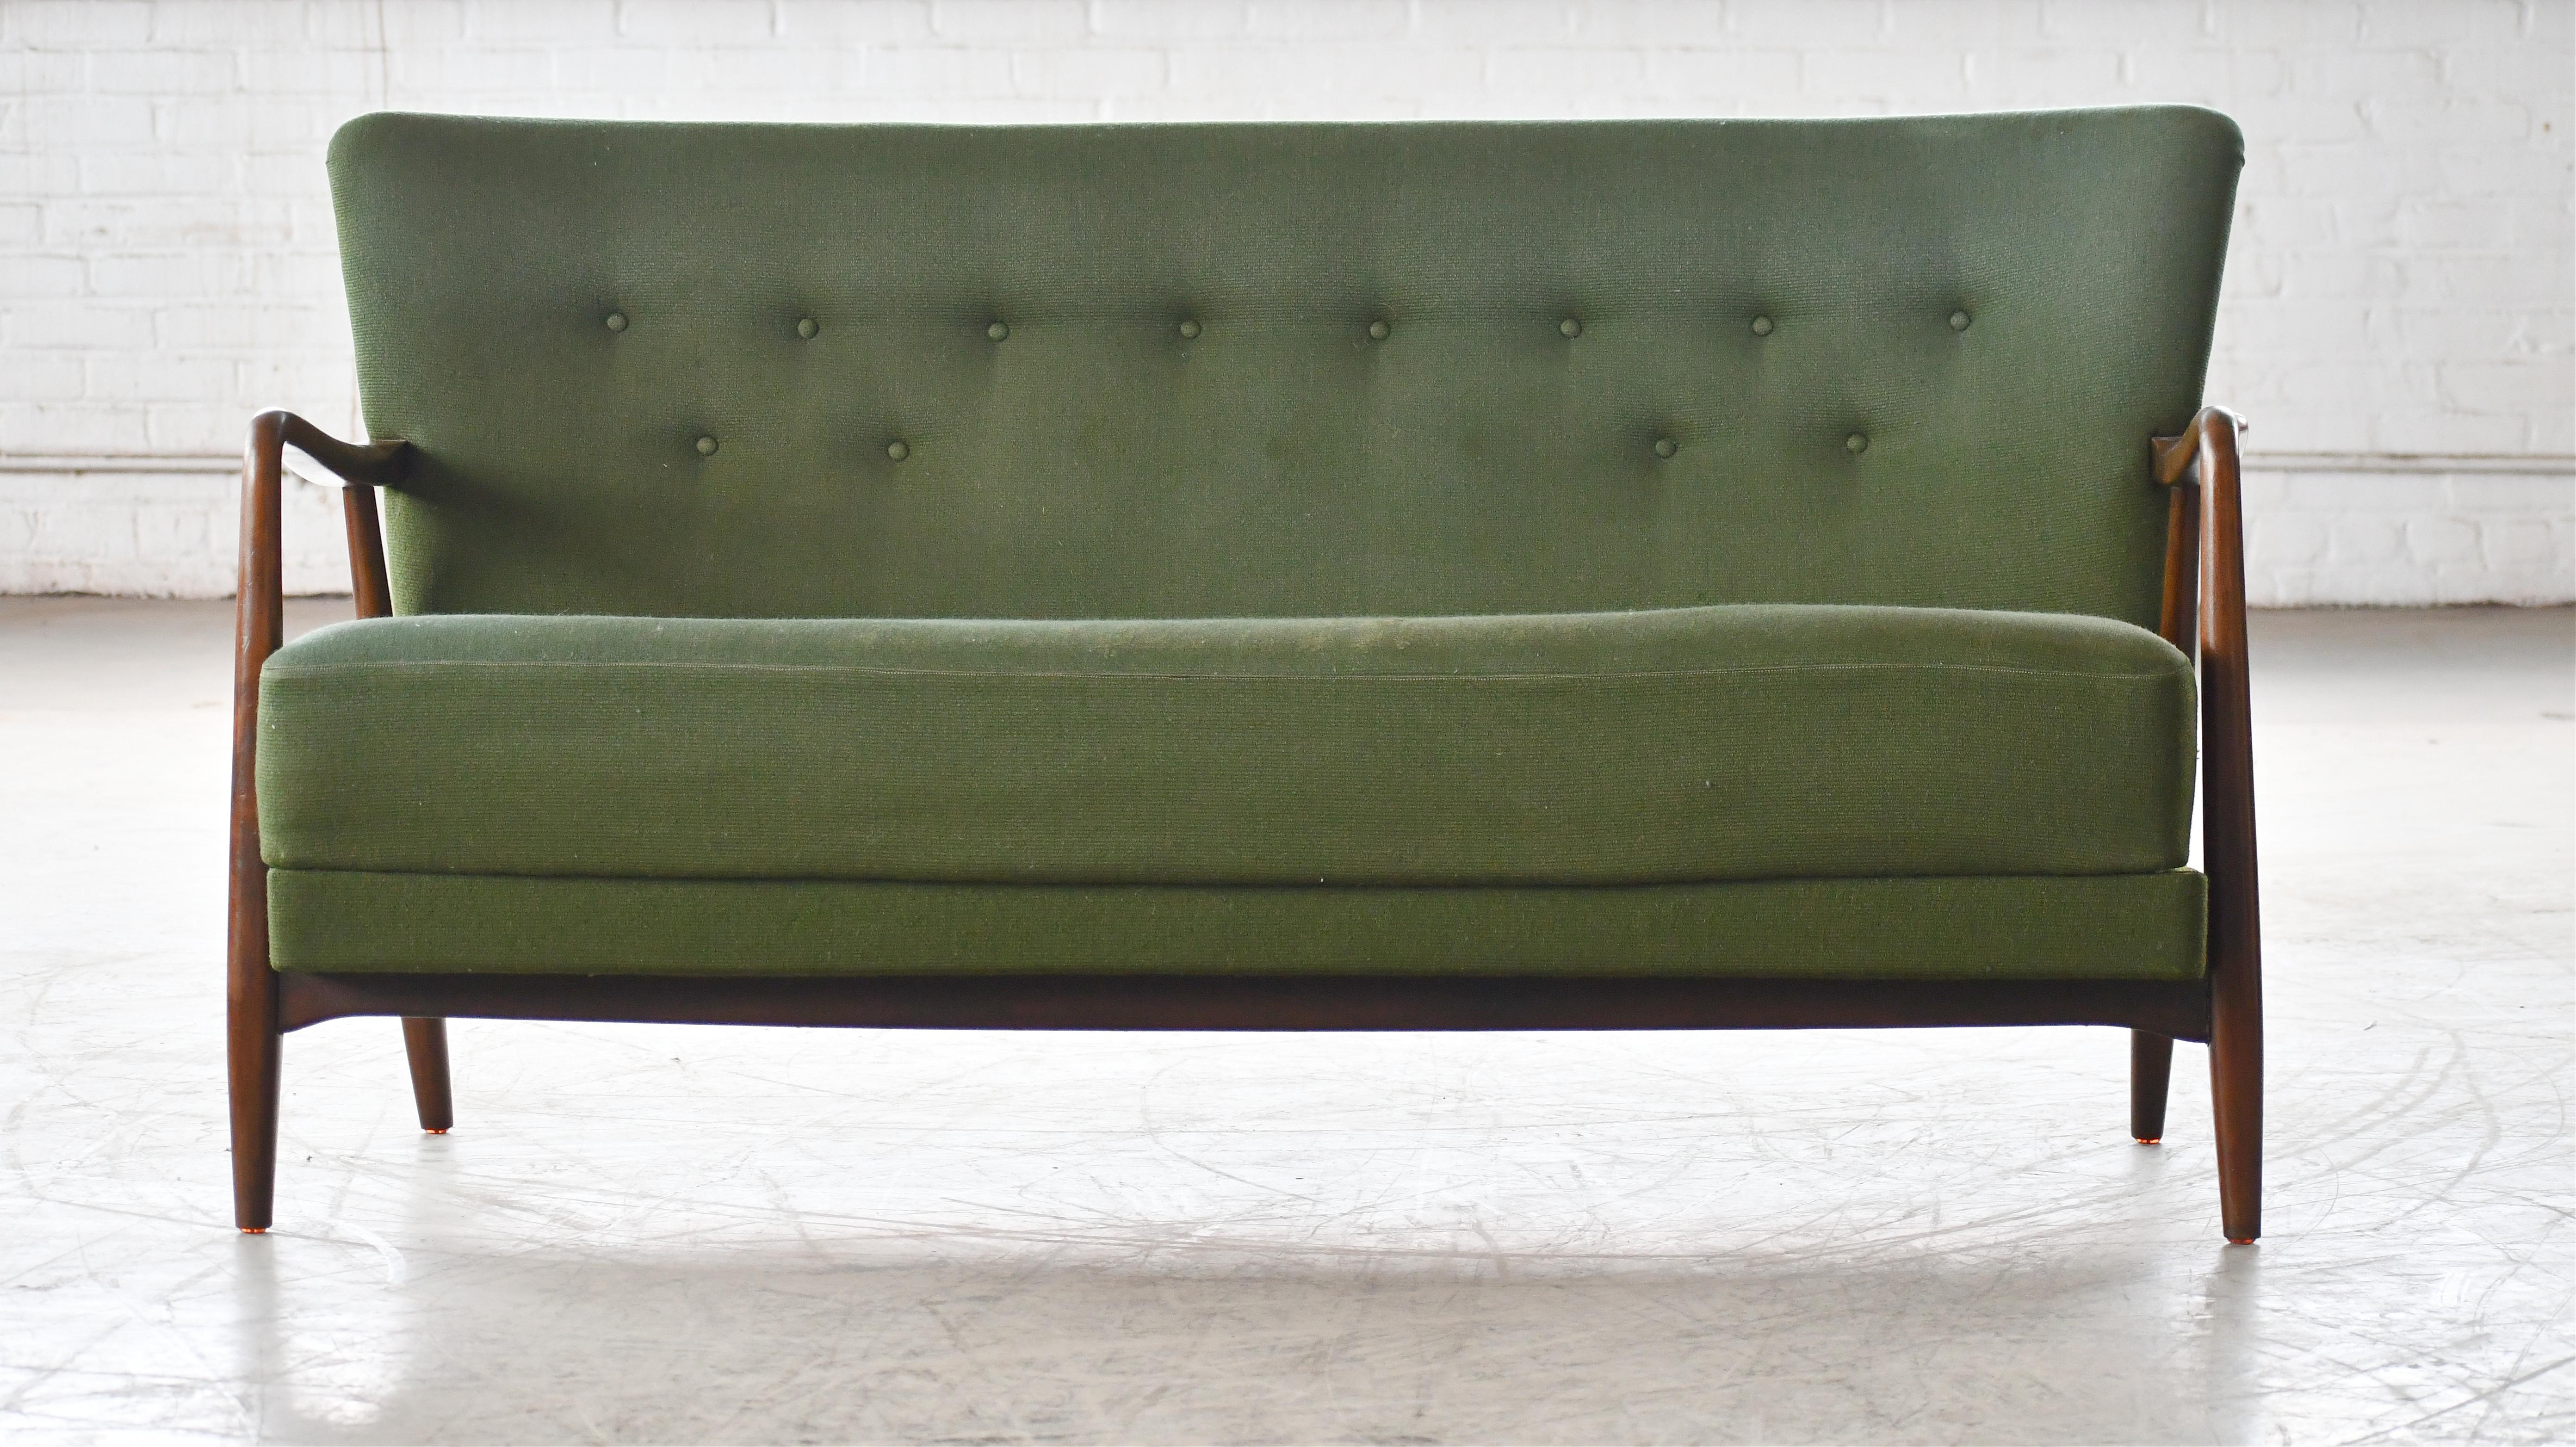 Fantastic 1940s Alfred Christensen designed sofa in his characteristic style of open armrests carved from solid beech wood and made by Slagelse Mobelvaerk in the 1940s. Beautiful refined lines with curving arms that extend into the front leg. Coil